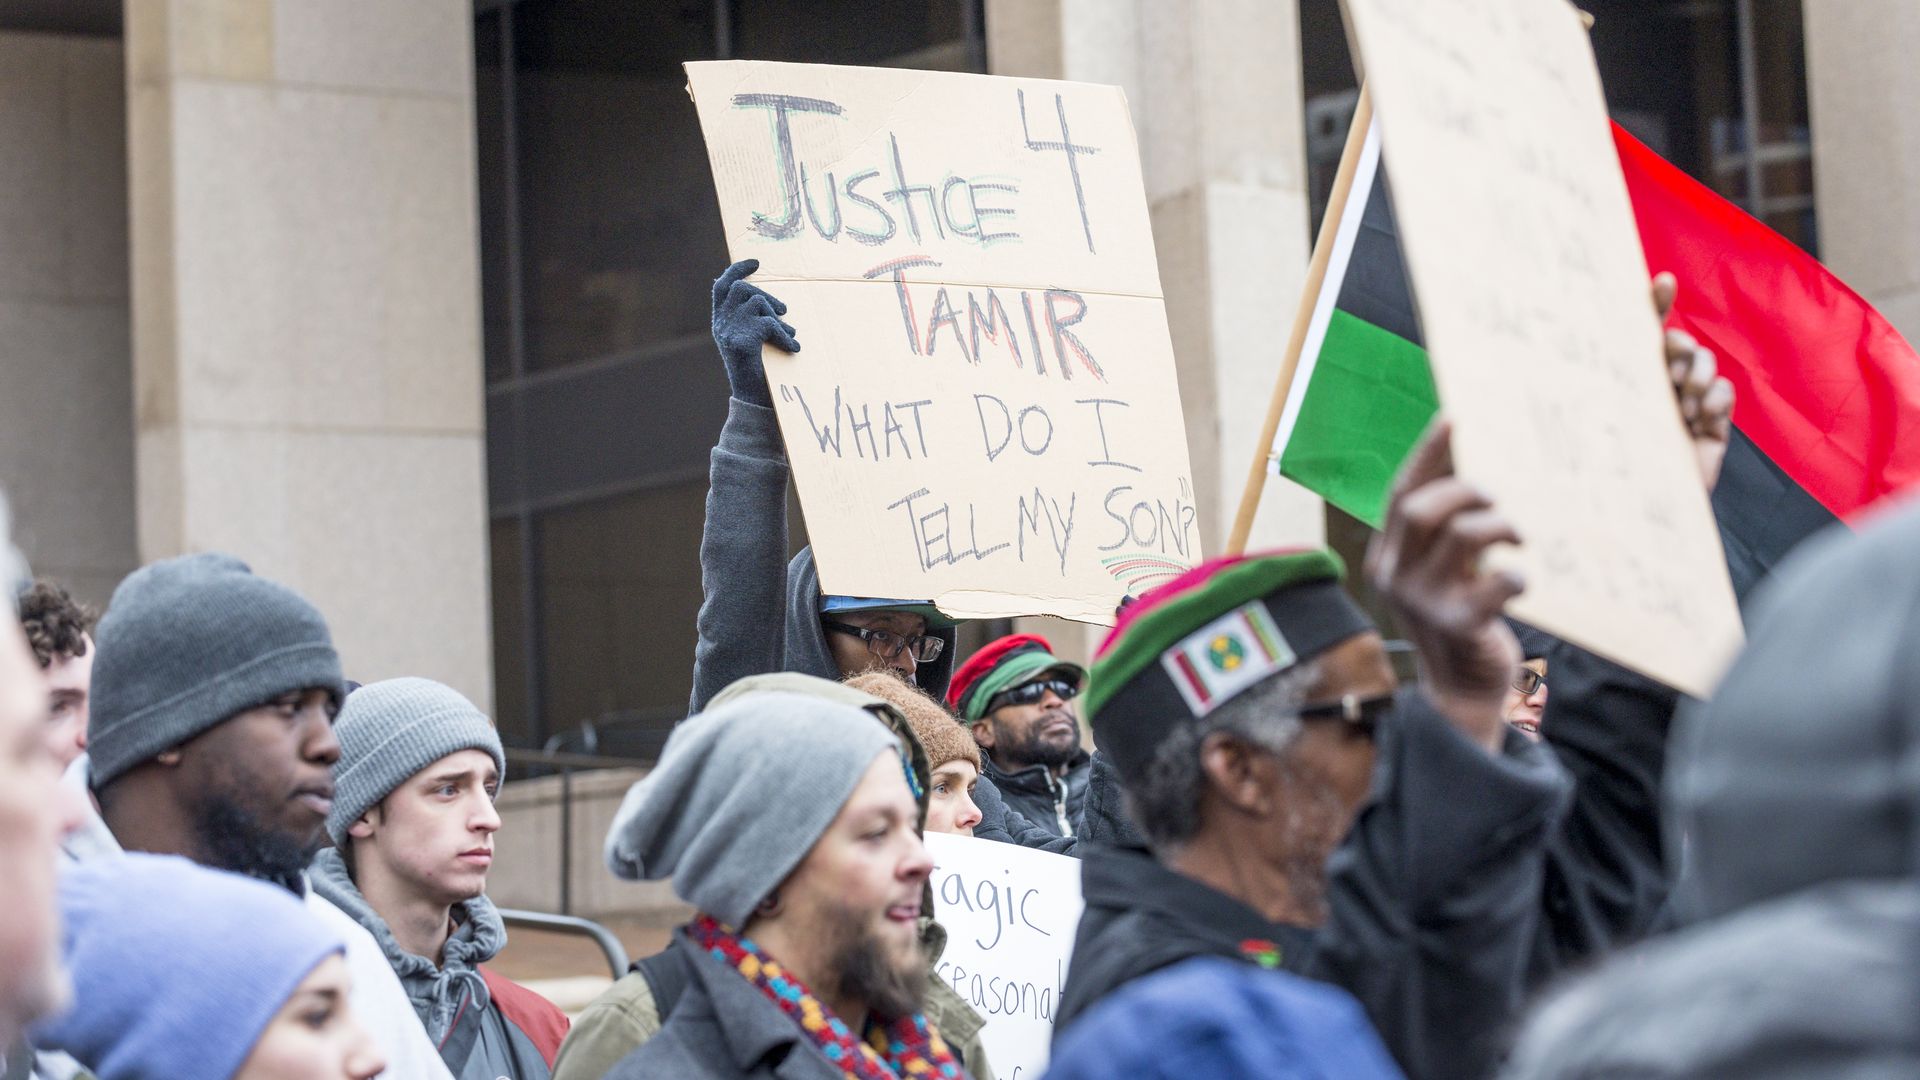 Photo of a person holding up a sign that says "Justice 4 Tamir. What do I tell my son?" at a protest